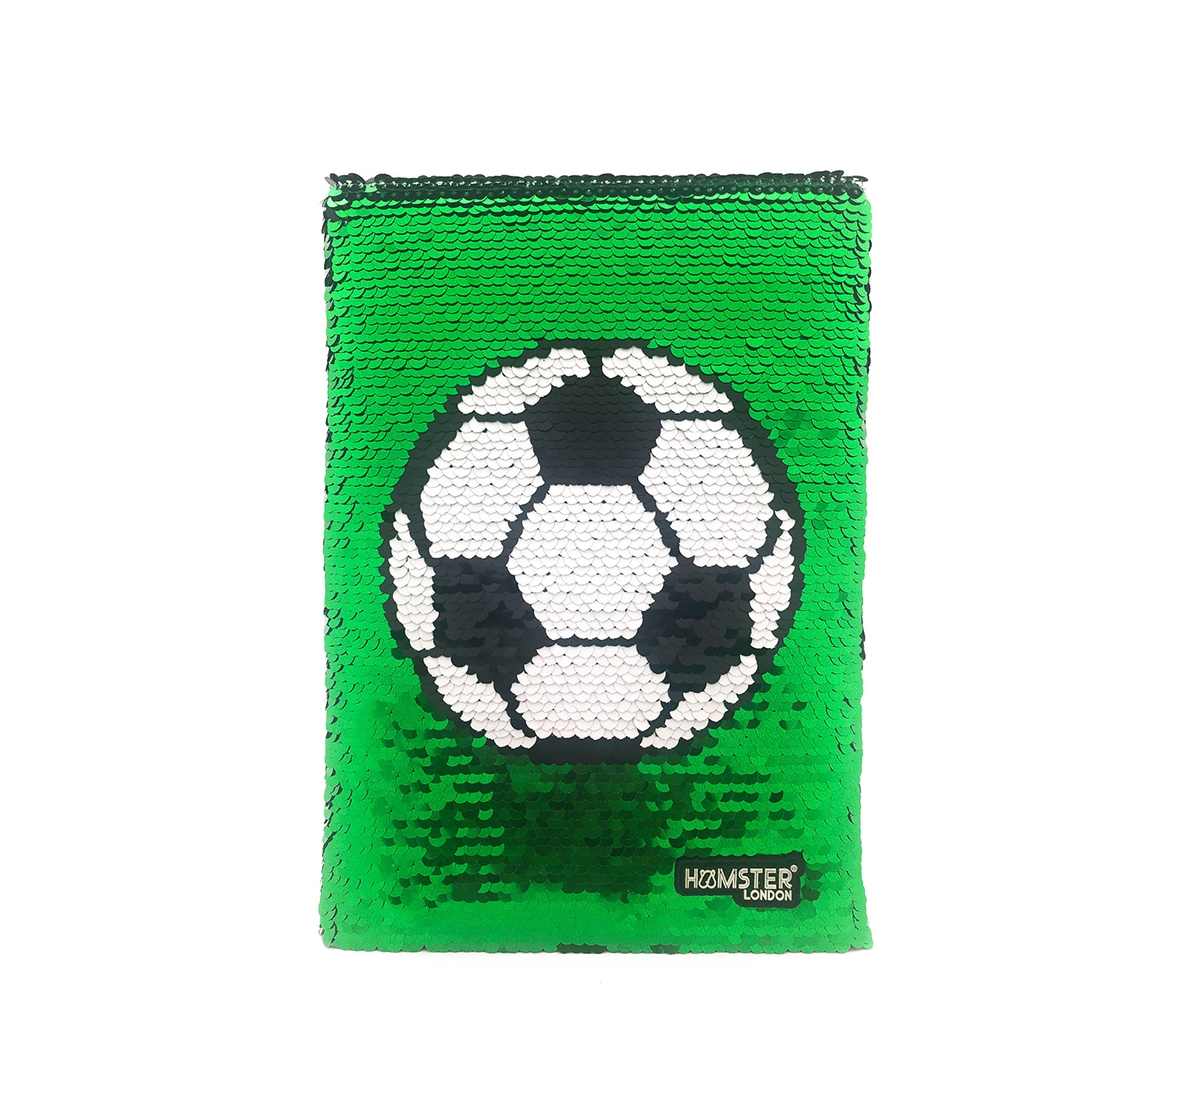 Hamster London | Hamster London Sequin Football Diary for Kids age 3Y+ (Green)  0